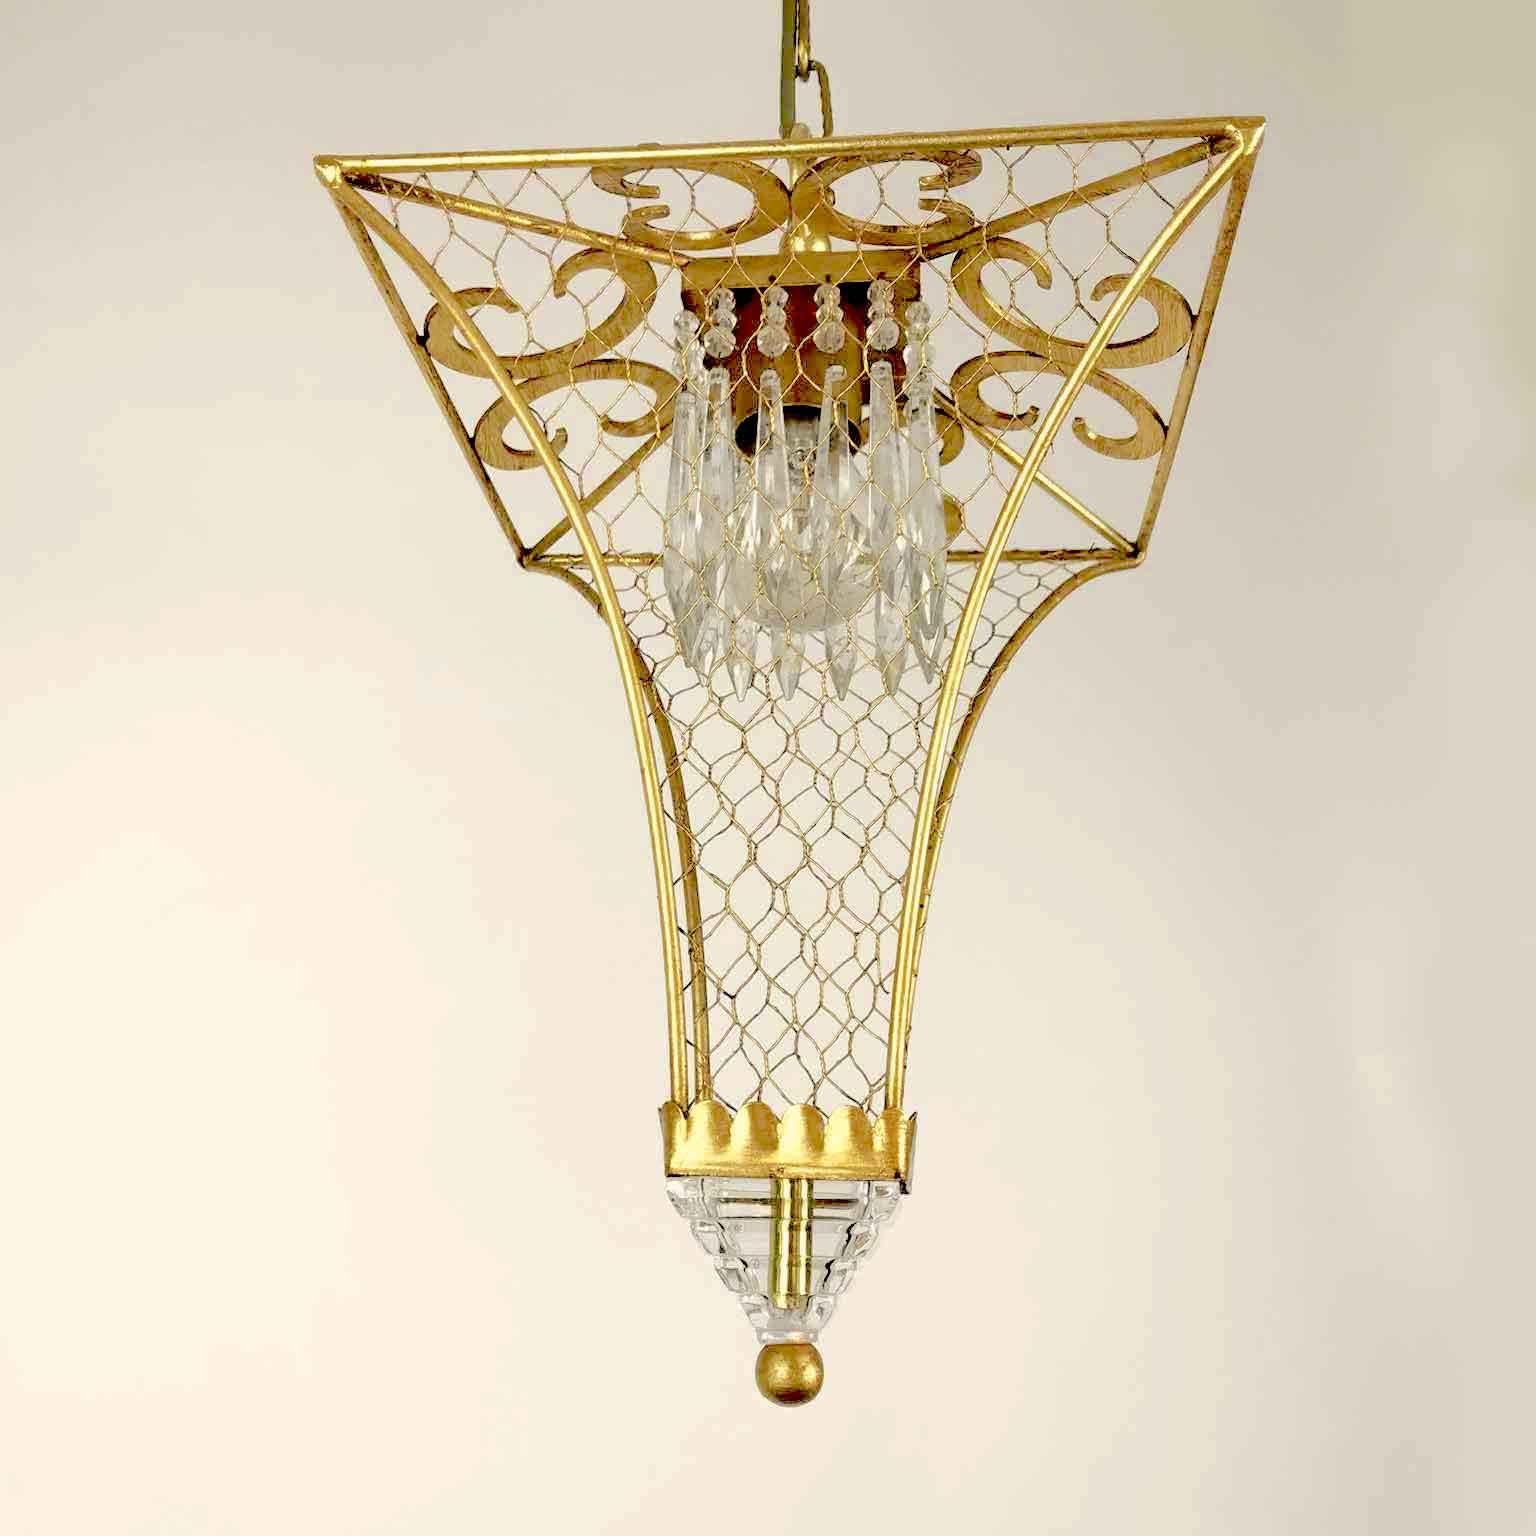 Vintage Italian lantern with a leaf-gilded iron pagoda shaped cage realized with wrought iron scrolls in the upper part and decorated with net sides, finial frosted glass elements, the E27 light in the upper part is surrounded by a ring of crystal